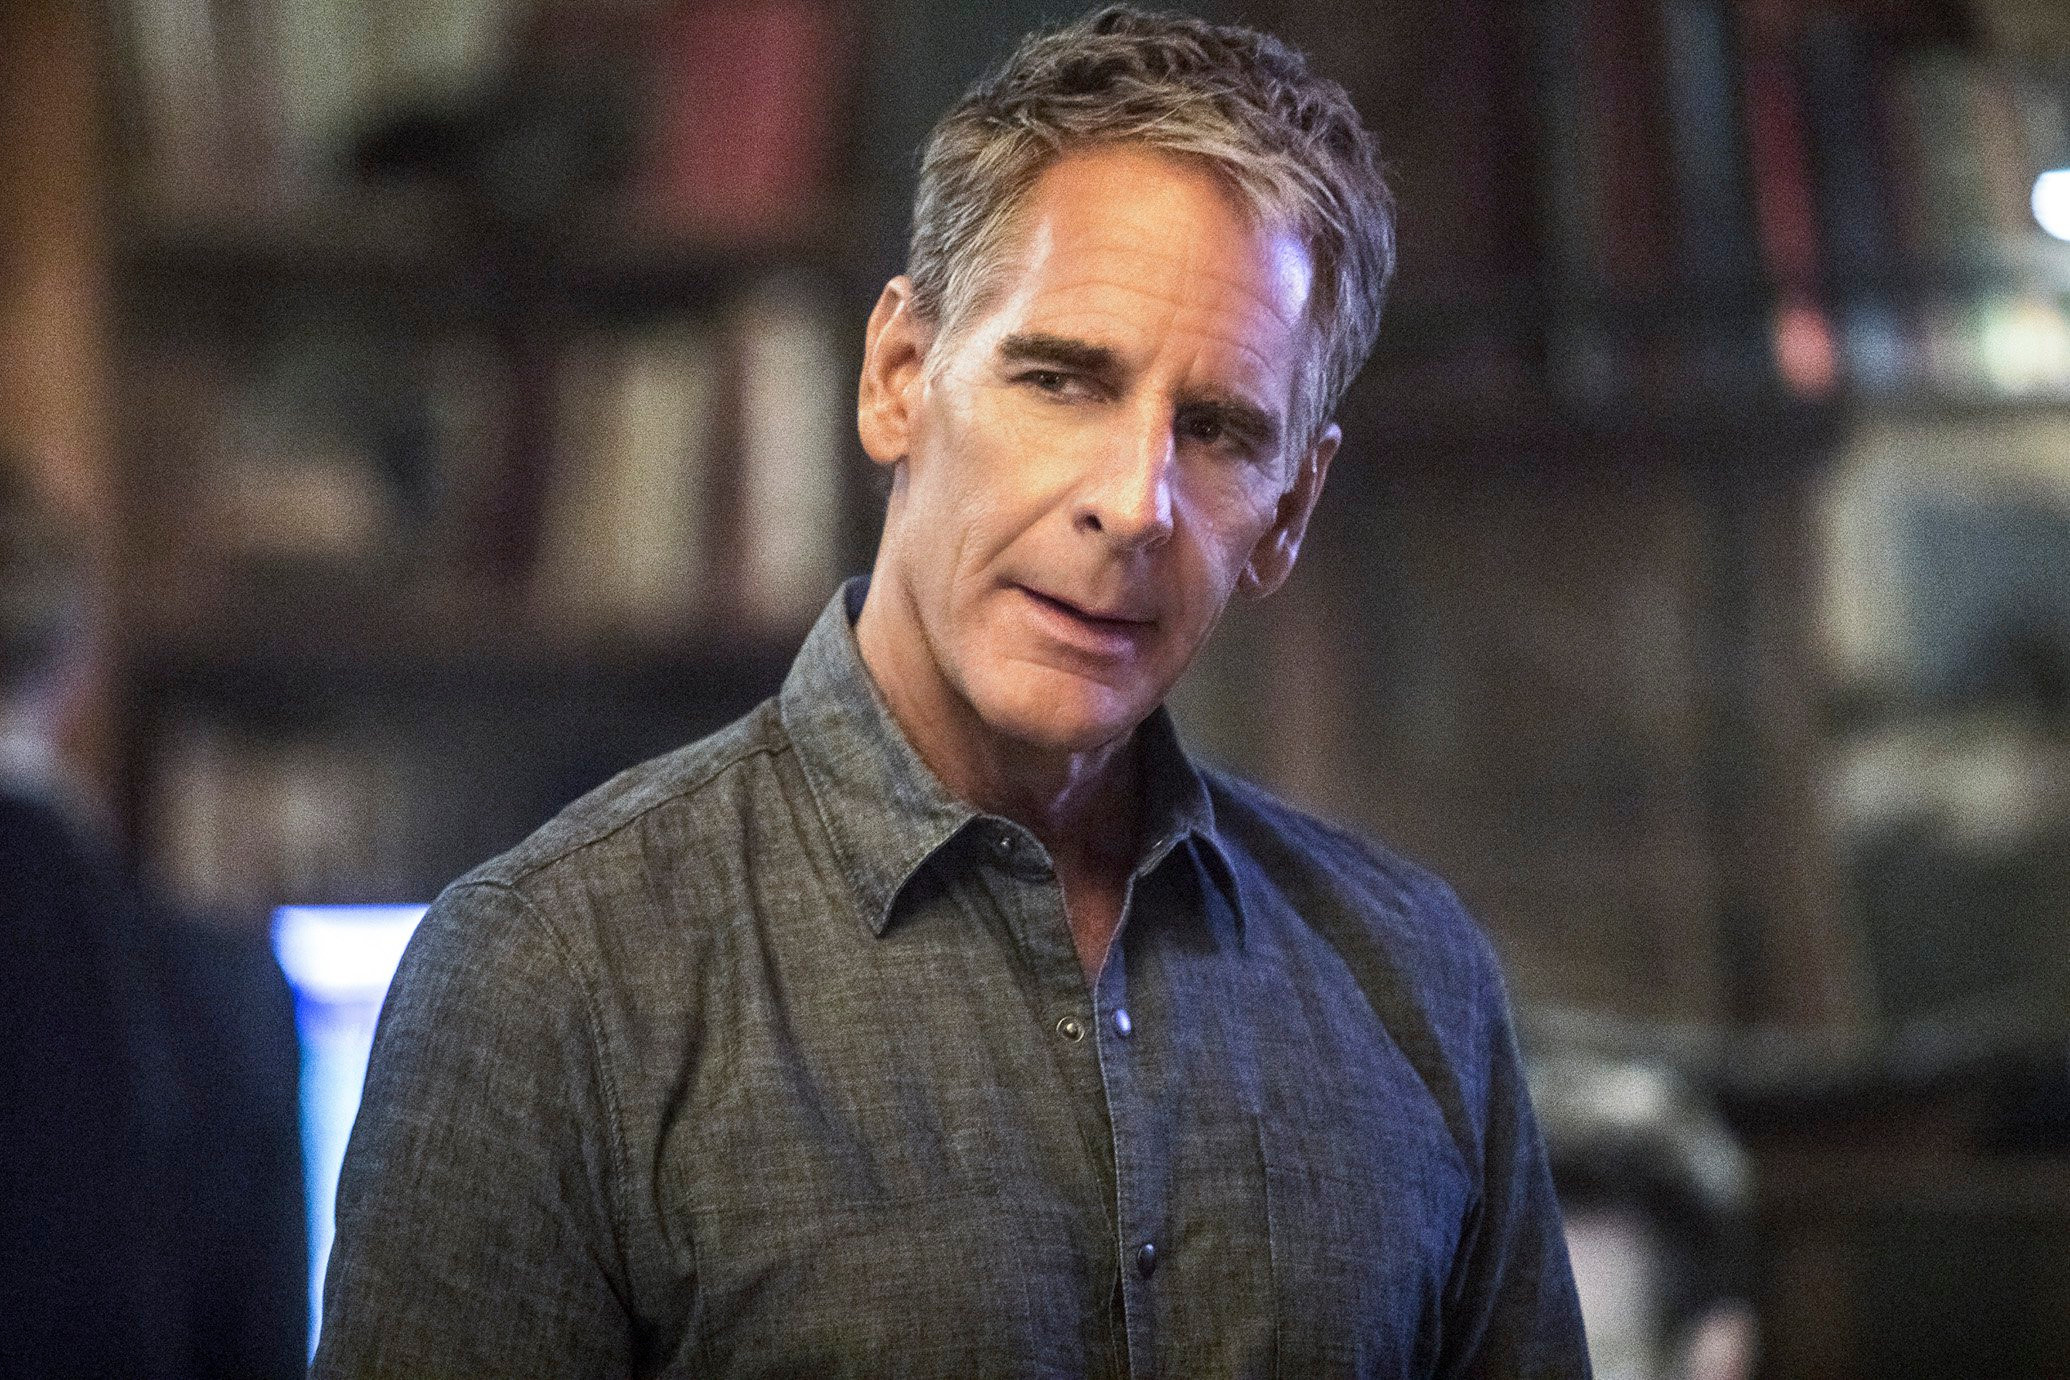 NCIS: New Orleans ending after season 7 with cast and fans absolutely devastated: ‘I honestly never thought I’d see the day’